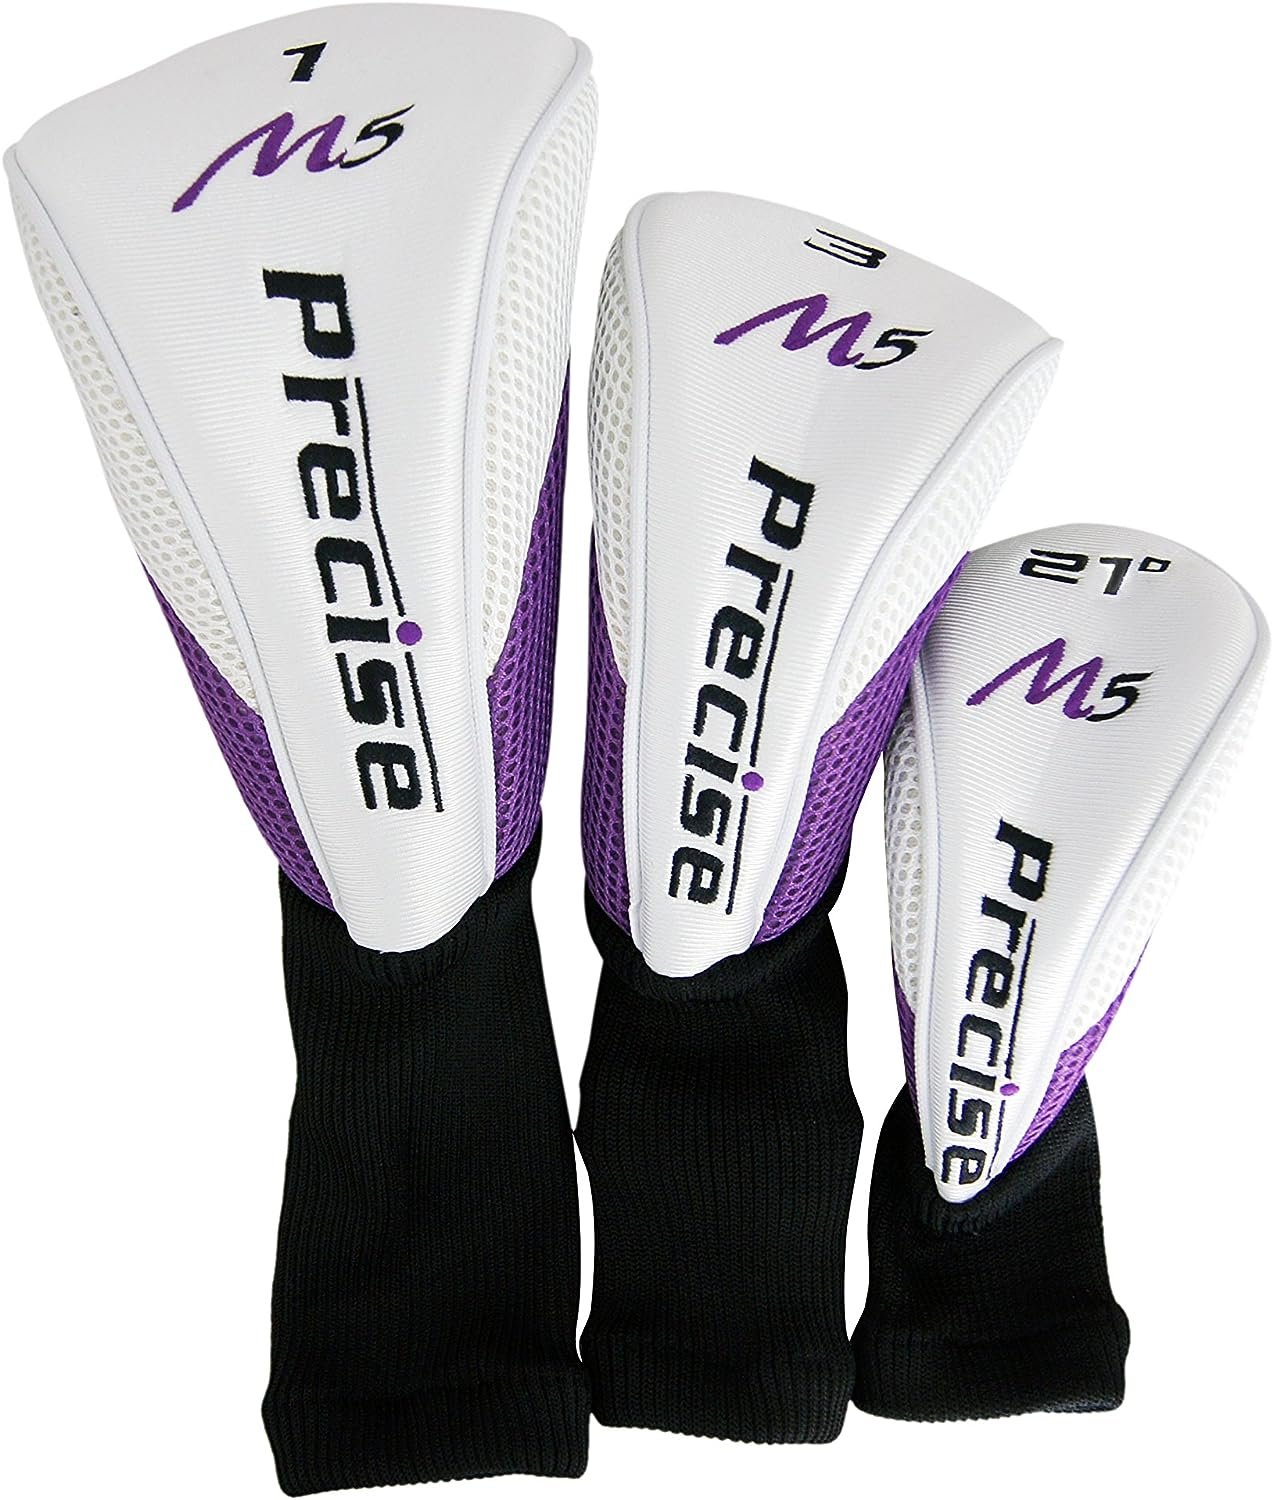 Precise M5 Ladies Womens Complete Right Handed Golf Clubs Set Includes Titanium Driver, S.S. Fairway, S.S. Hybrid, S.S. 5-PW Irons, Putter, Stand Bag, 3 H/Cs Purple